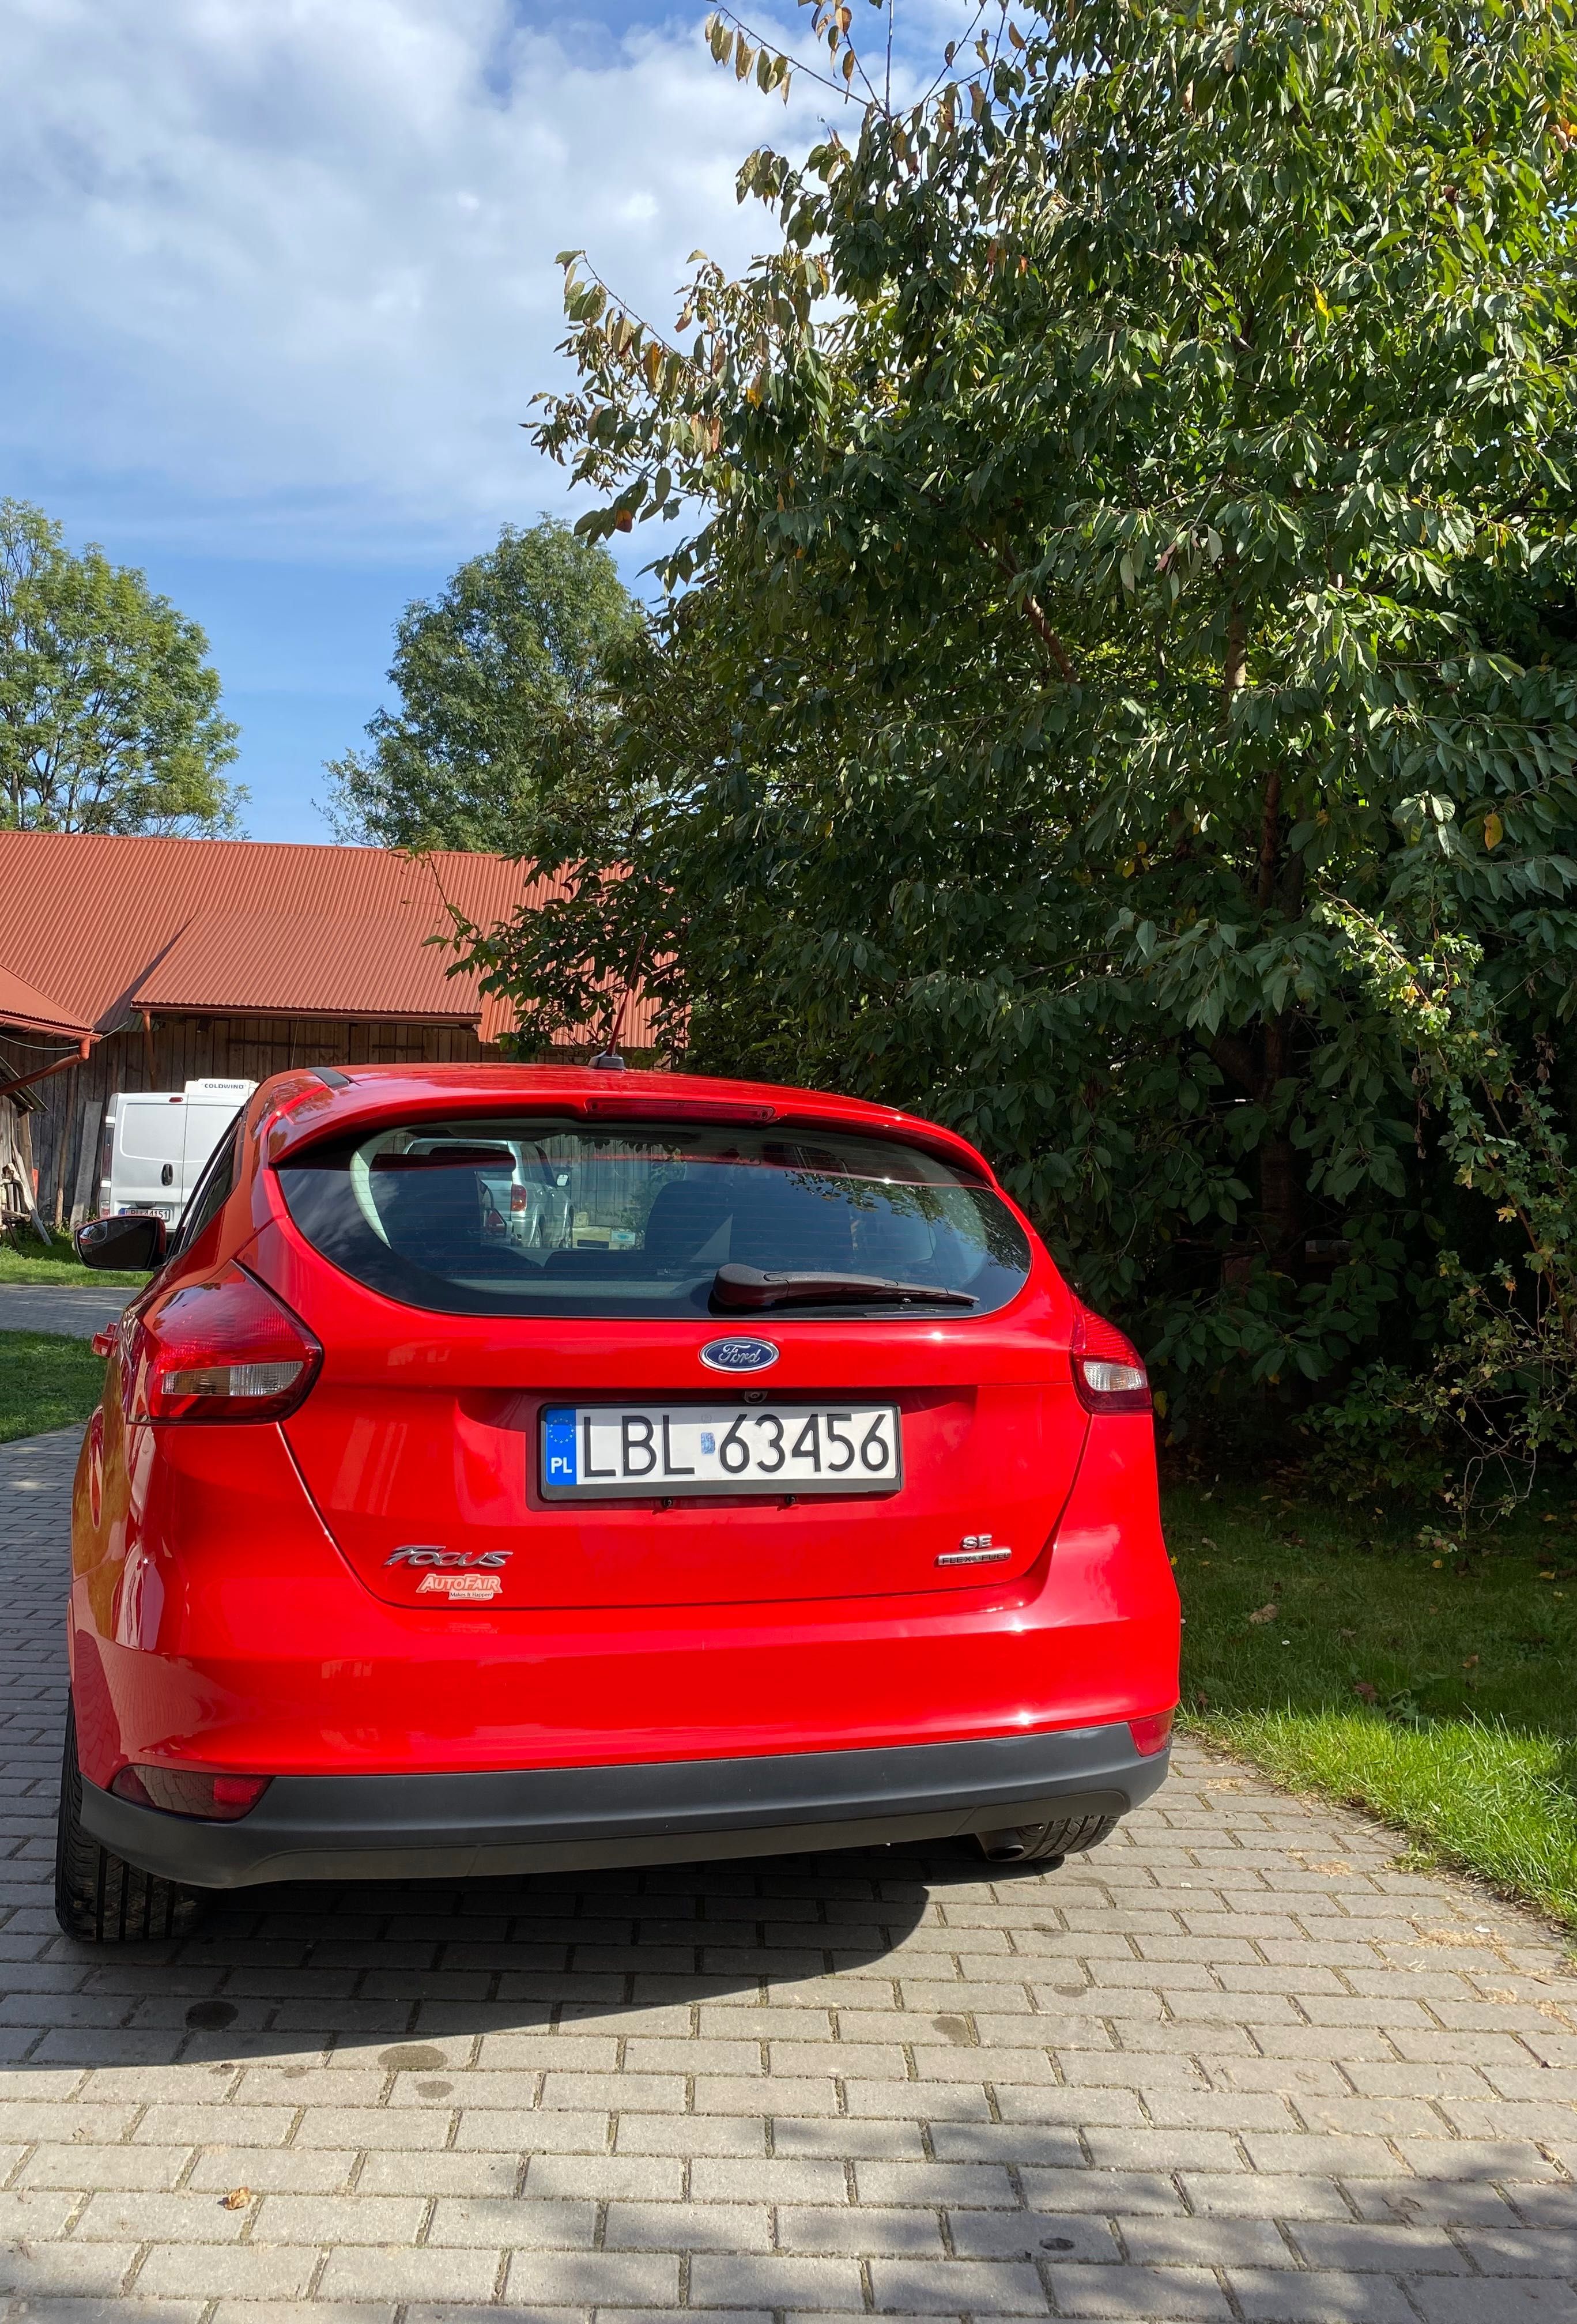 Ford Focus 2.0 se benzyna 163km lift